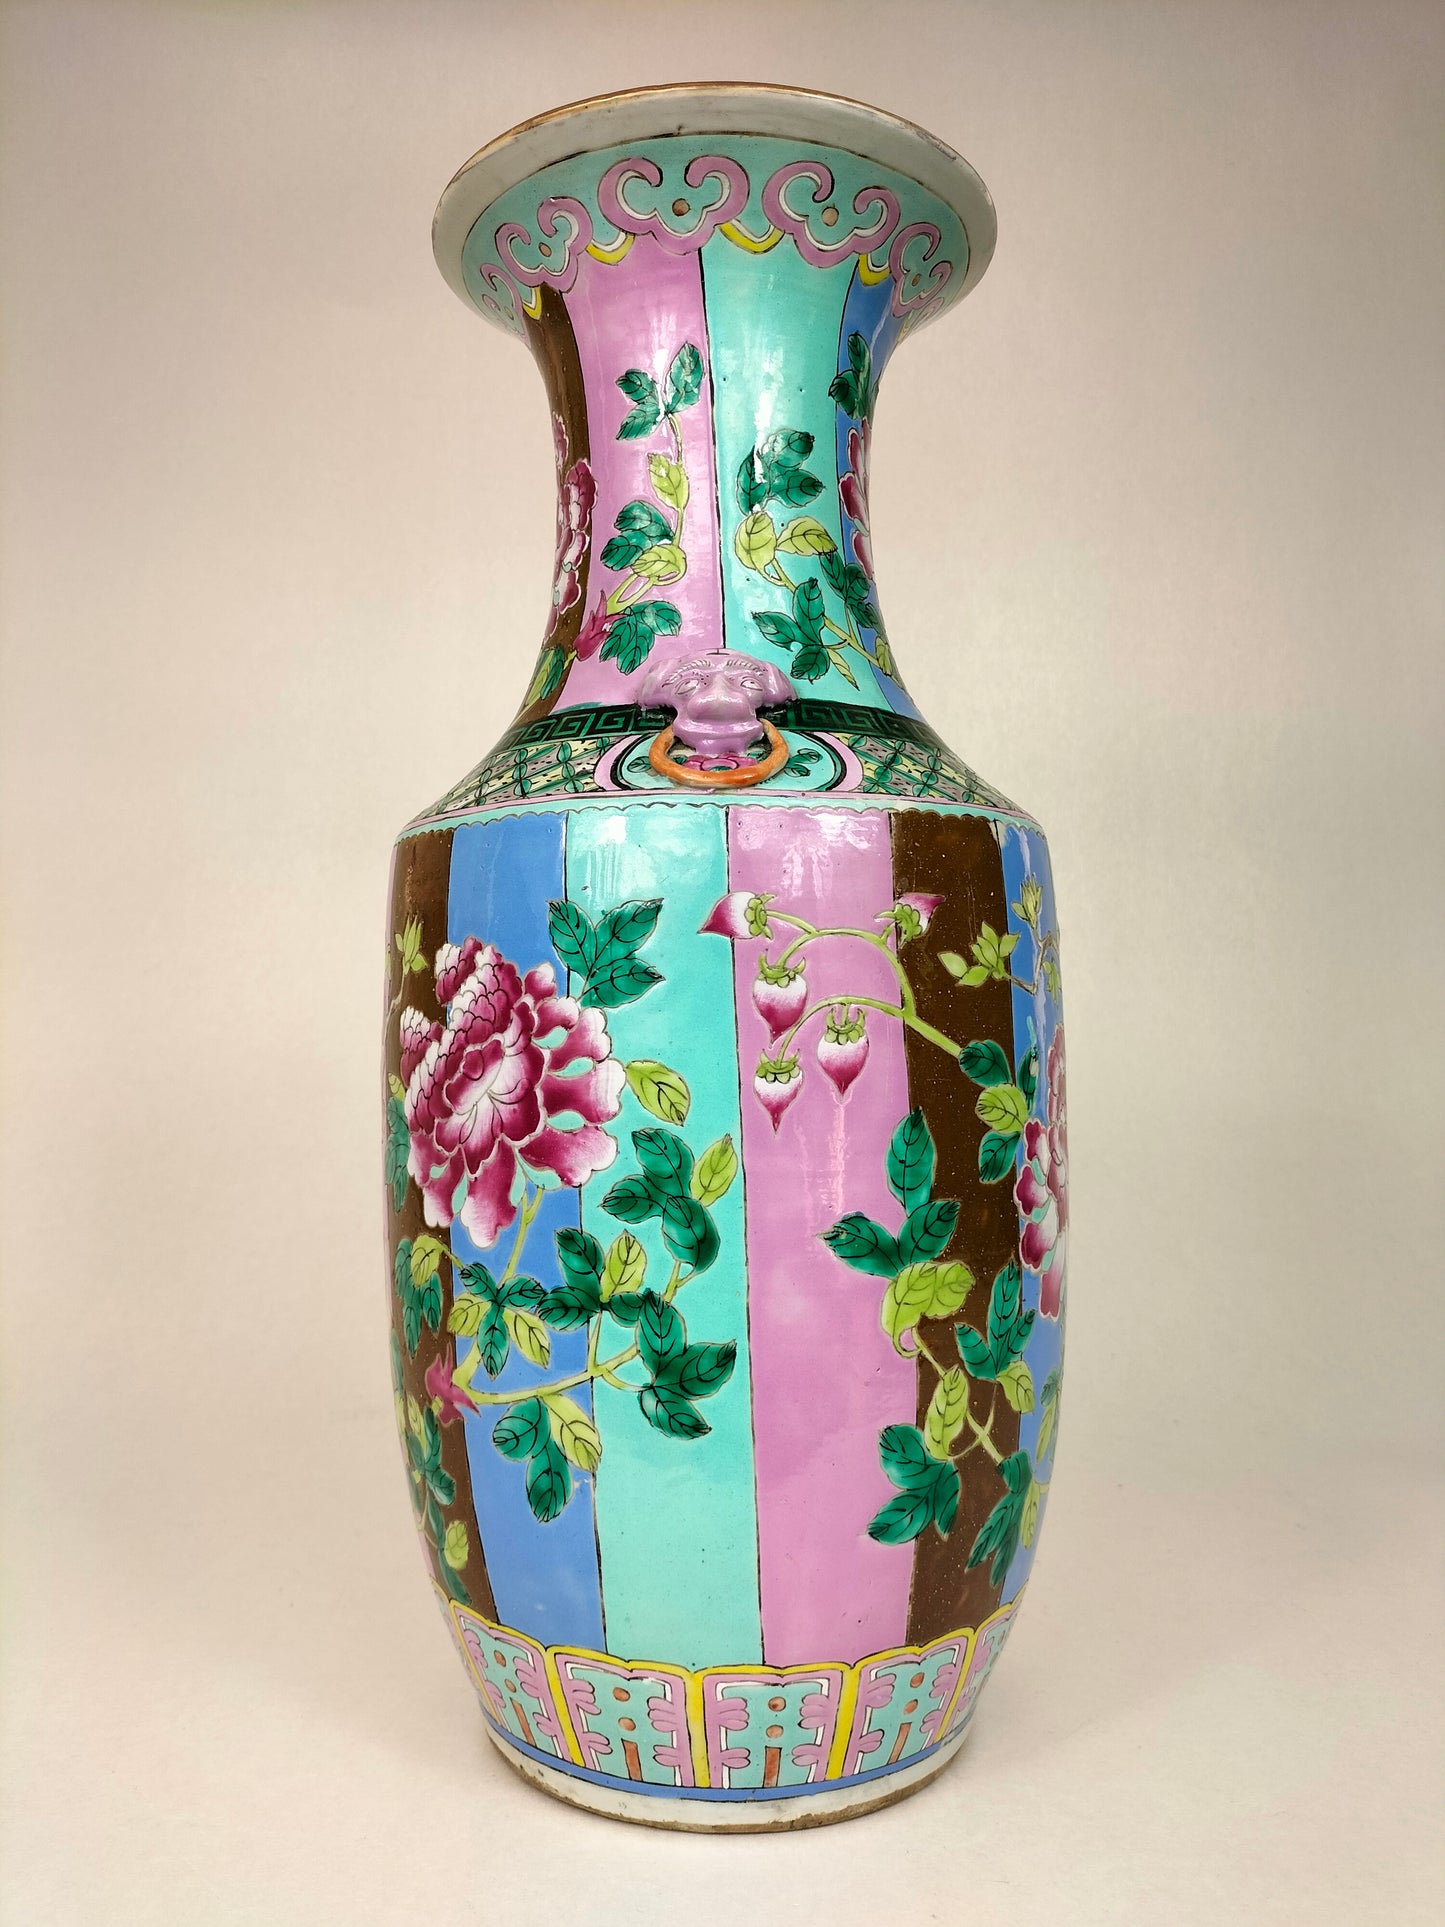 Antique Chinese famille rose vase with foo dog handles and a decoration of flowers // Qing Dynasty - 19th century